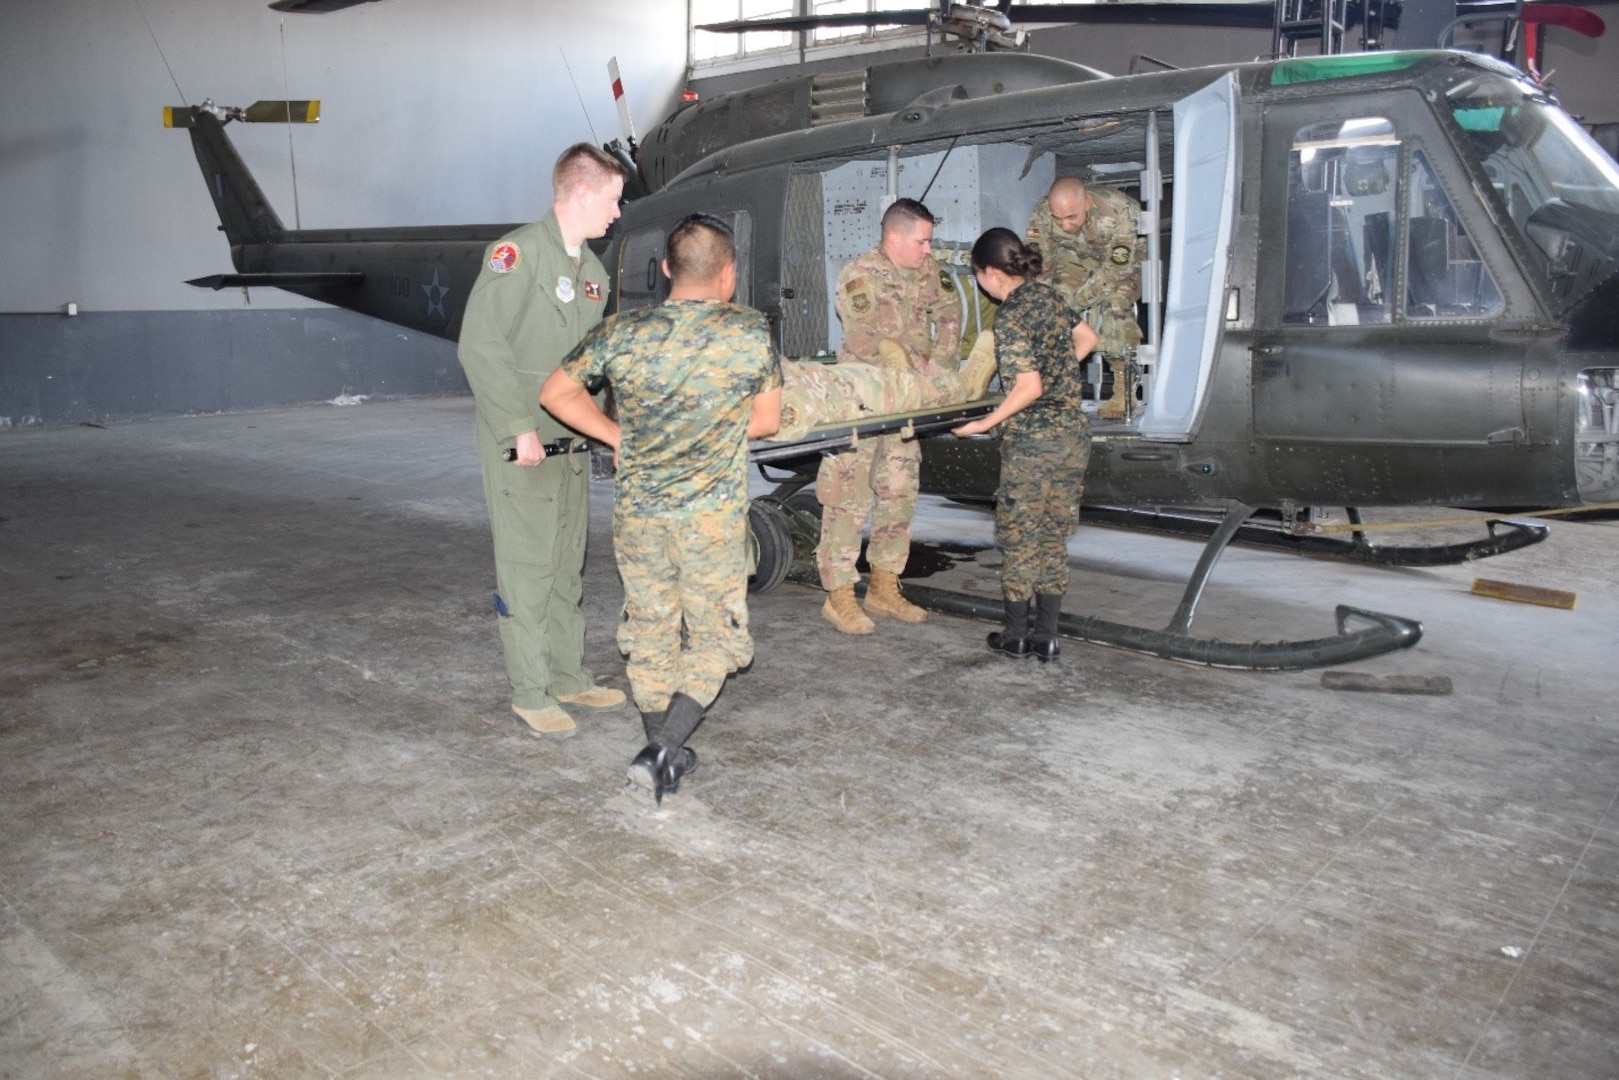 Air advisors from the 571 Mobility Support Advisory Squadron, and Guatemalan air force students practice loading a litter patient into the partner nation’s UH-1 aircraft during a mobile training mission at Aurora Air Base in Guatemala. The students are part of the first aeromedical evacuation unit in the Guatemalan air force. (Courtesy Photo)